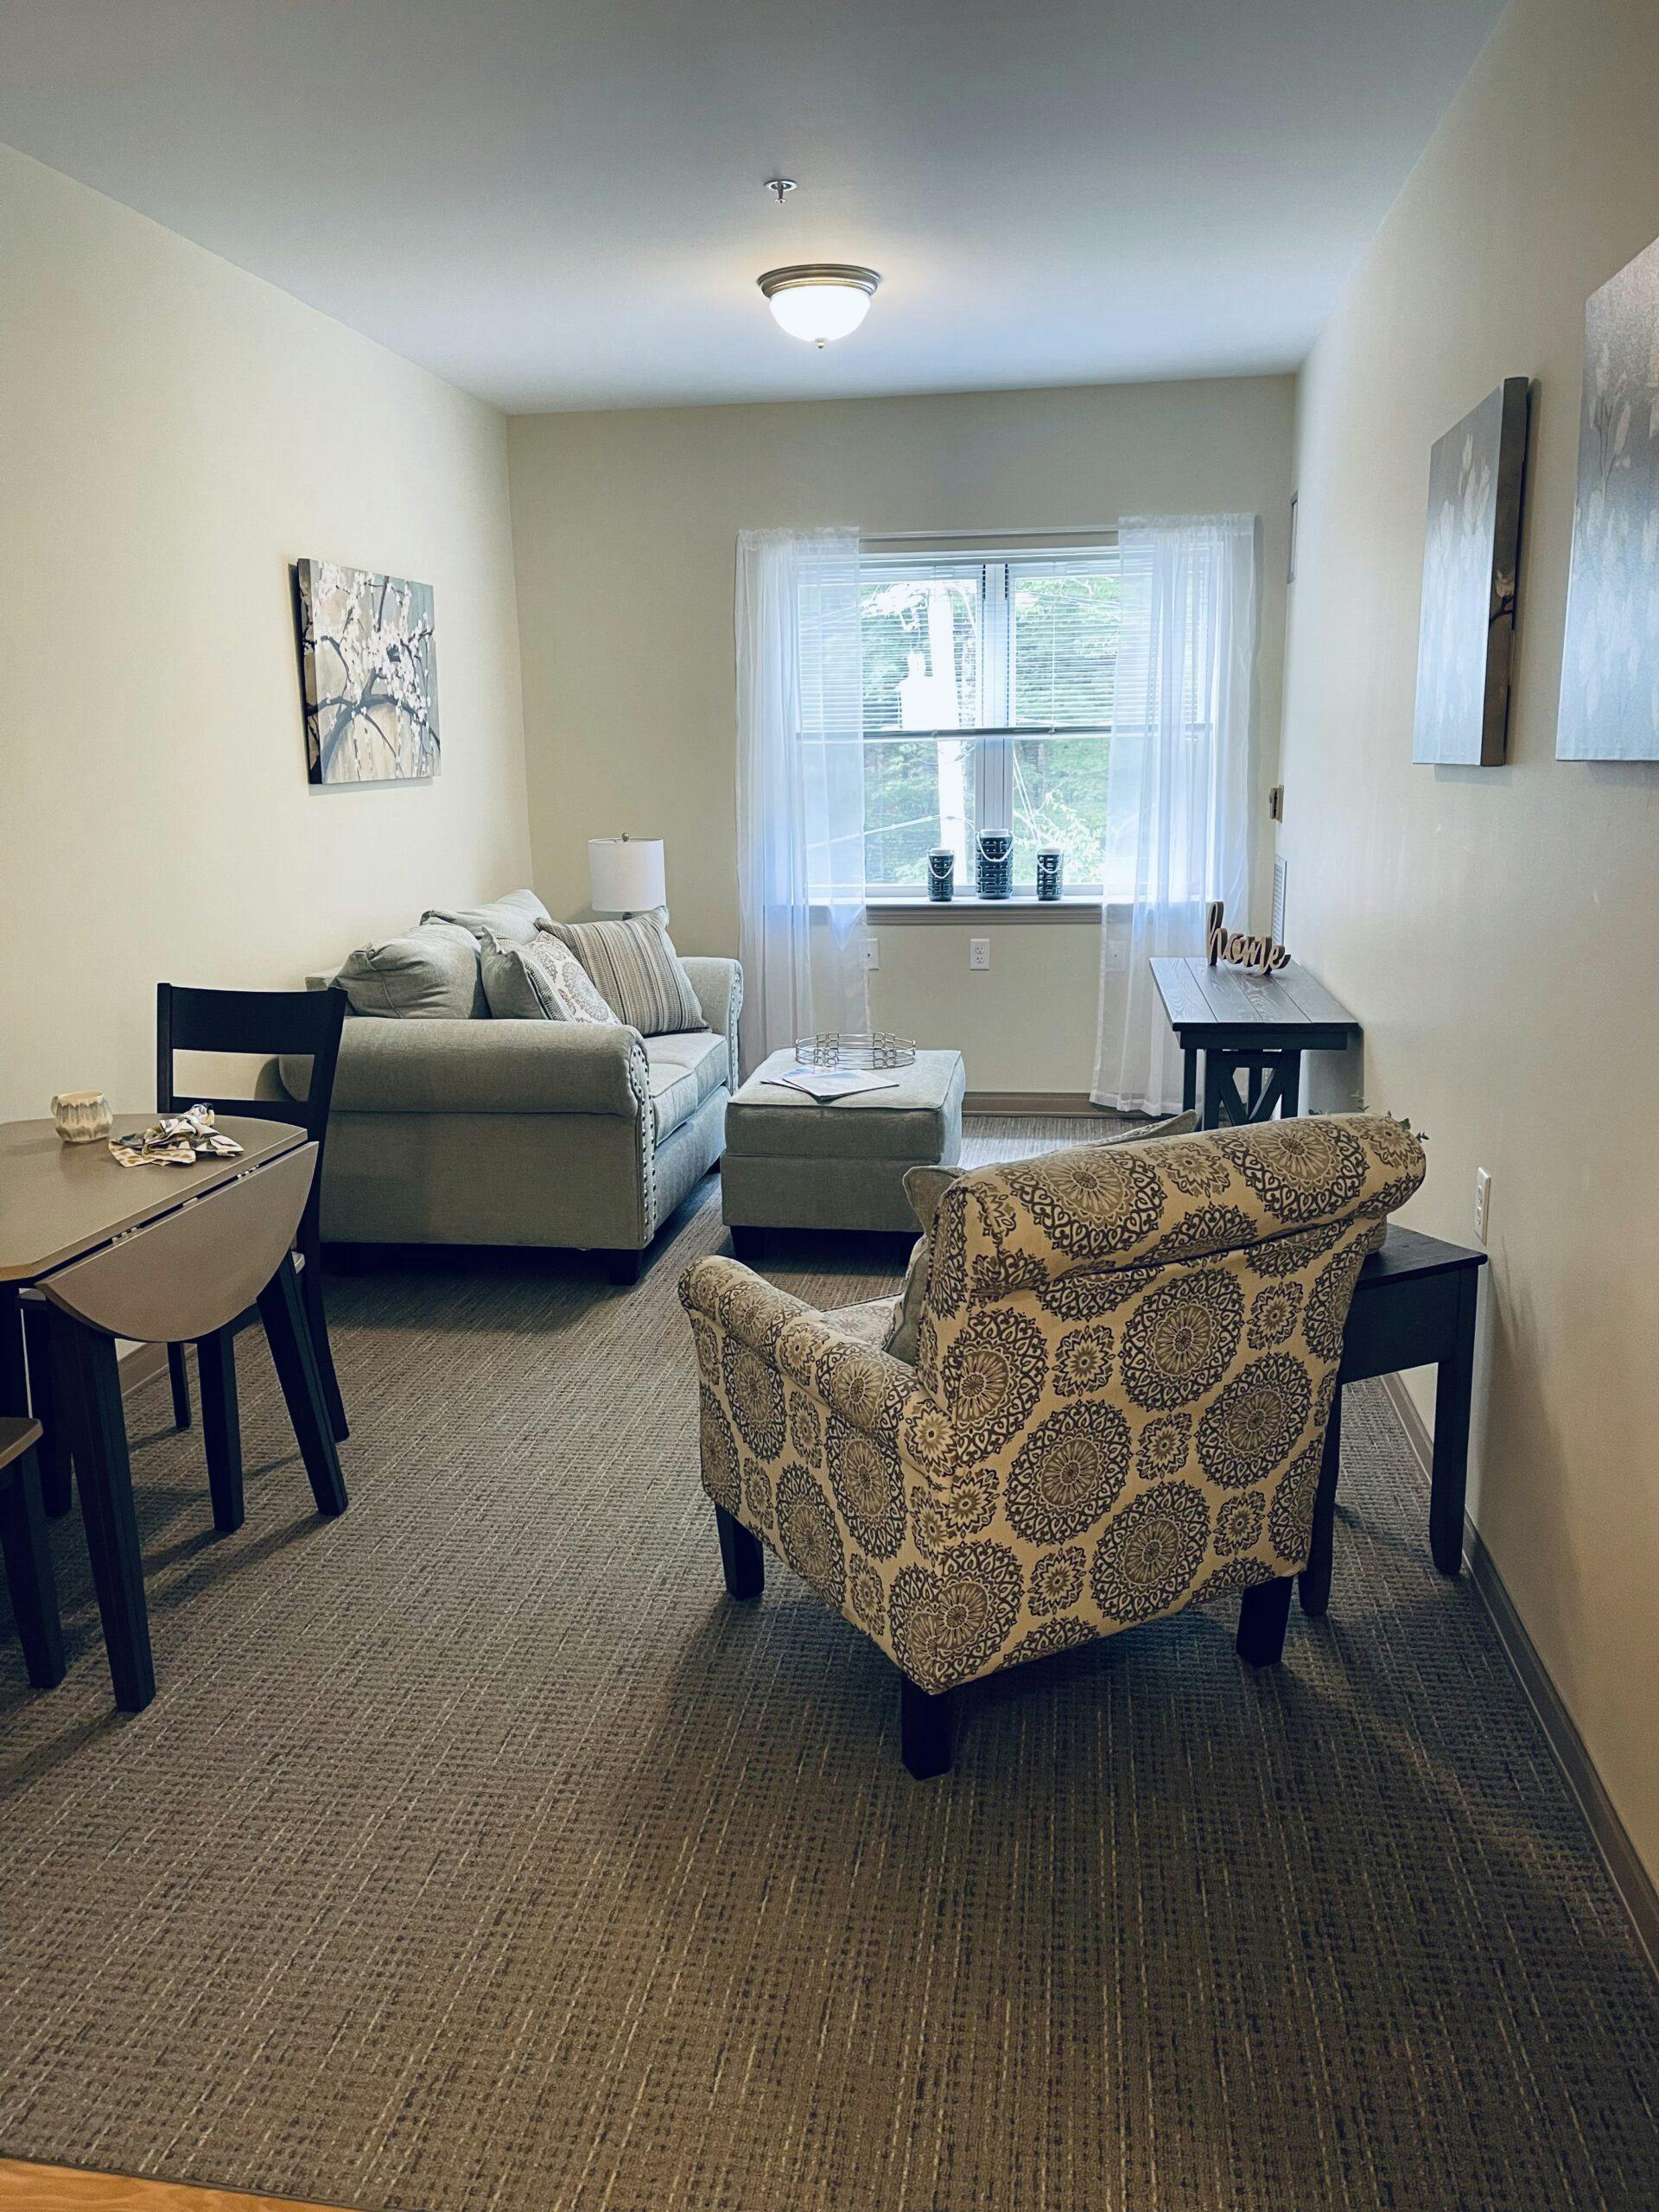 A living room in an assisted living facility with a dining table and chairs.